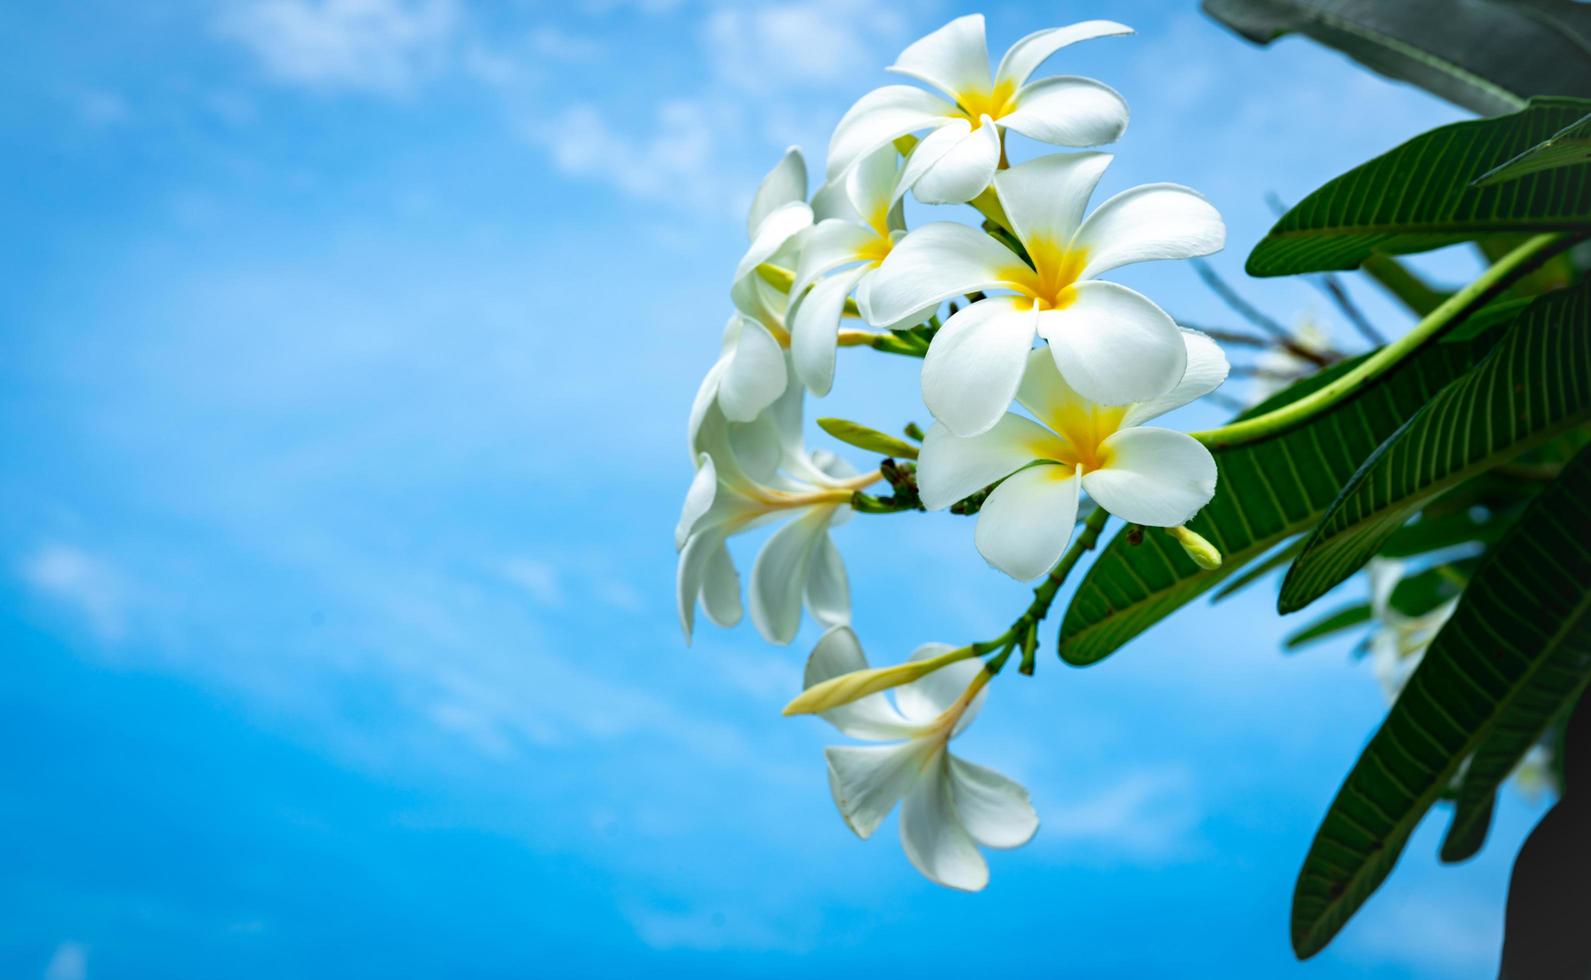 Frangipani flower Plumeria alba with green leaves on blue sky background. White flowers with yellow at center. Health and spa background. Summer spa concept. Relax emotion. White flower blooming. photo